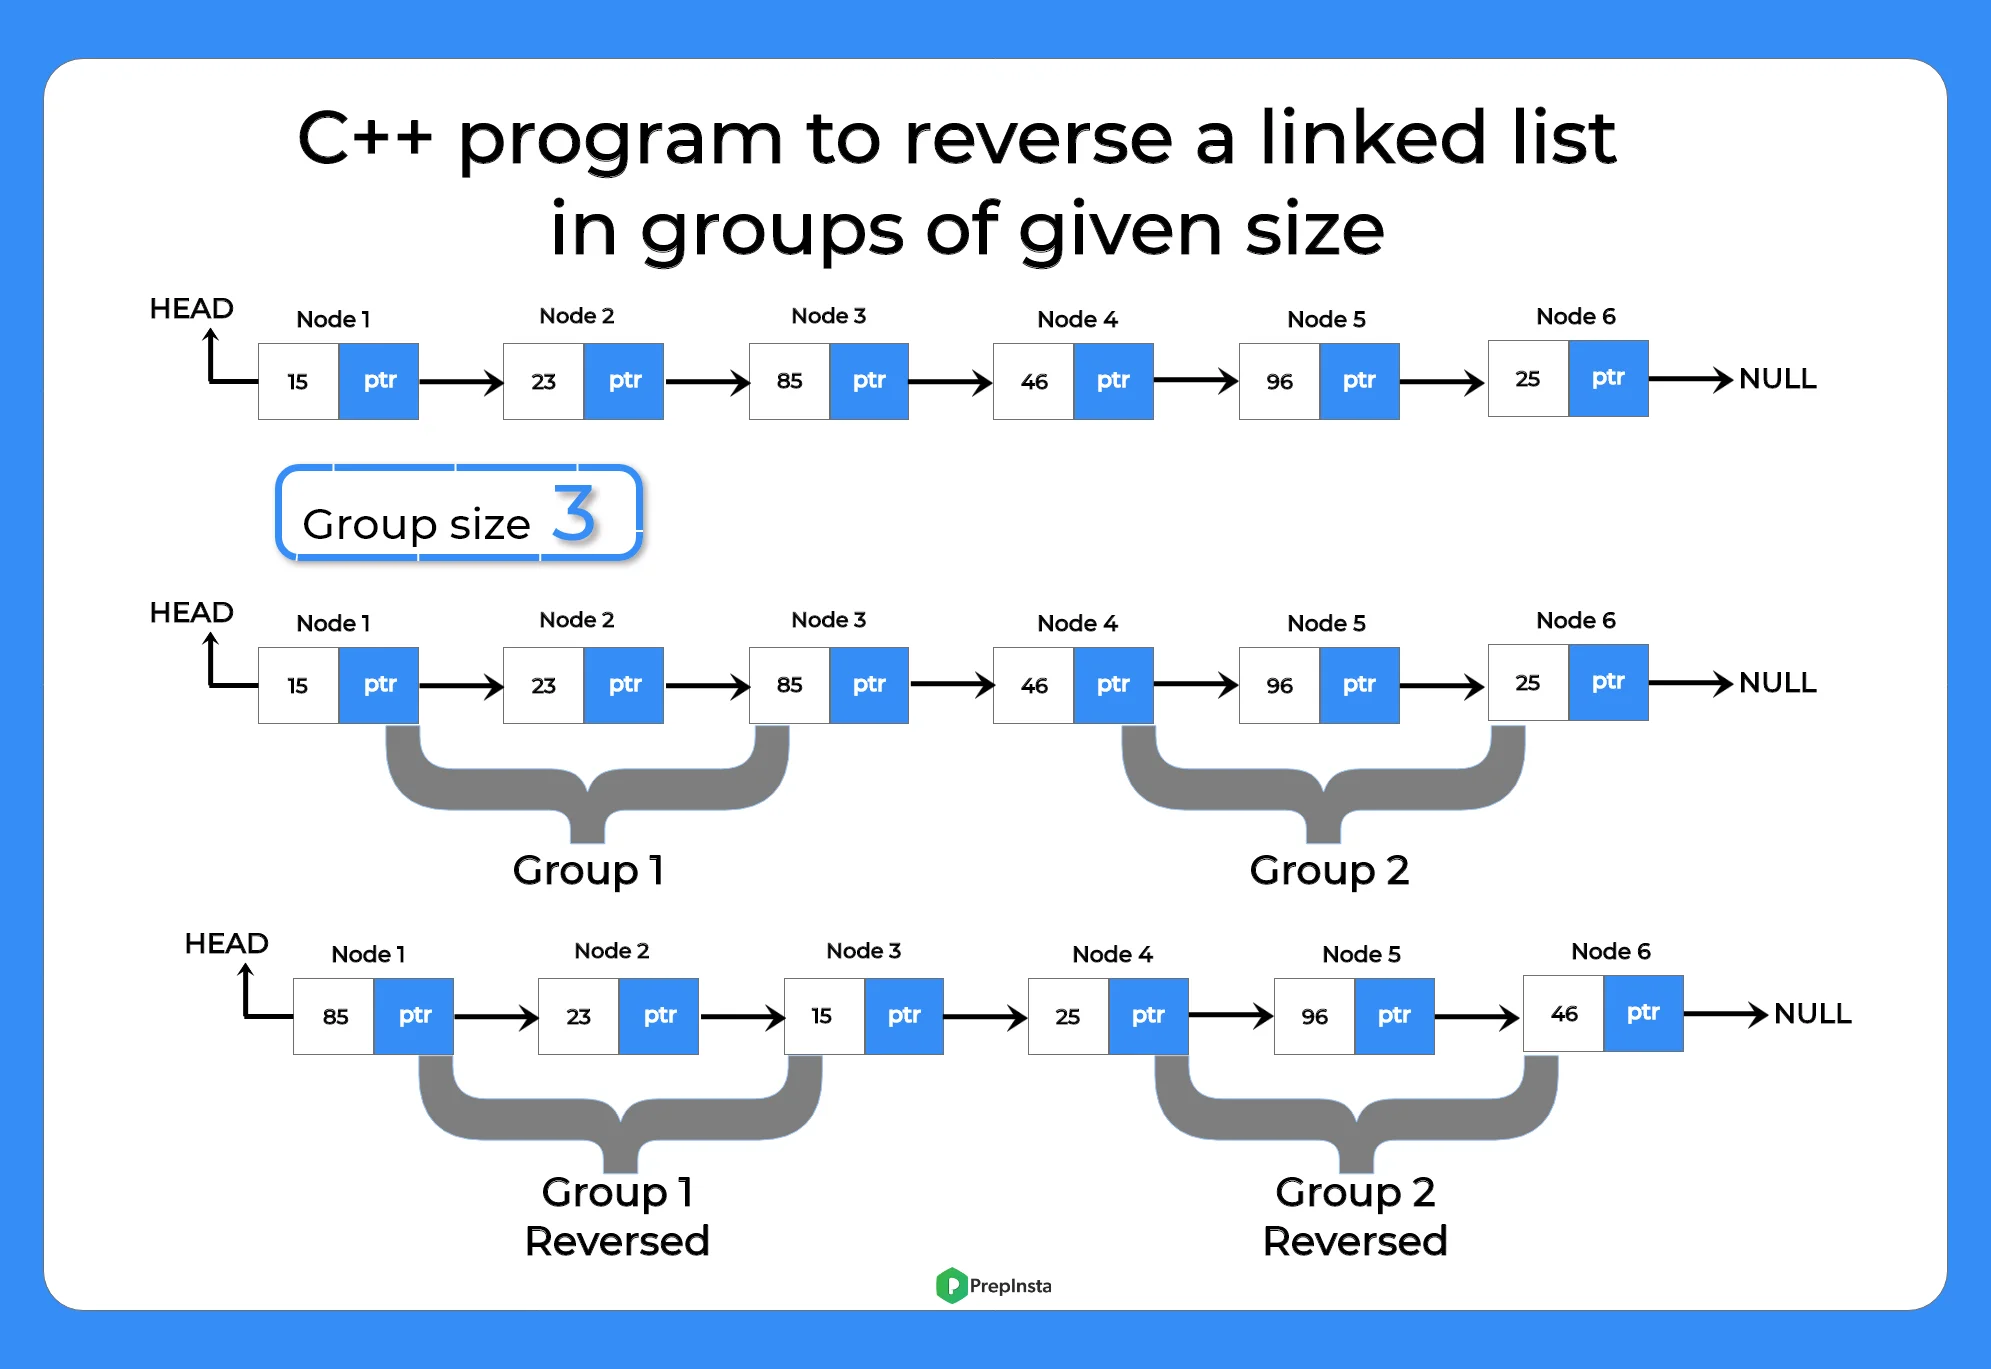 C++ program to reverse the linked list in groups of given size